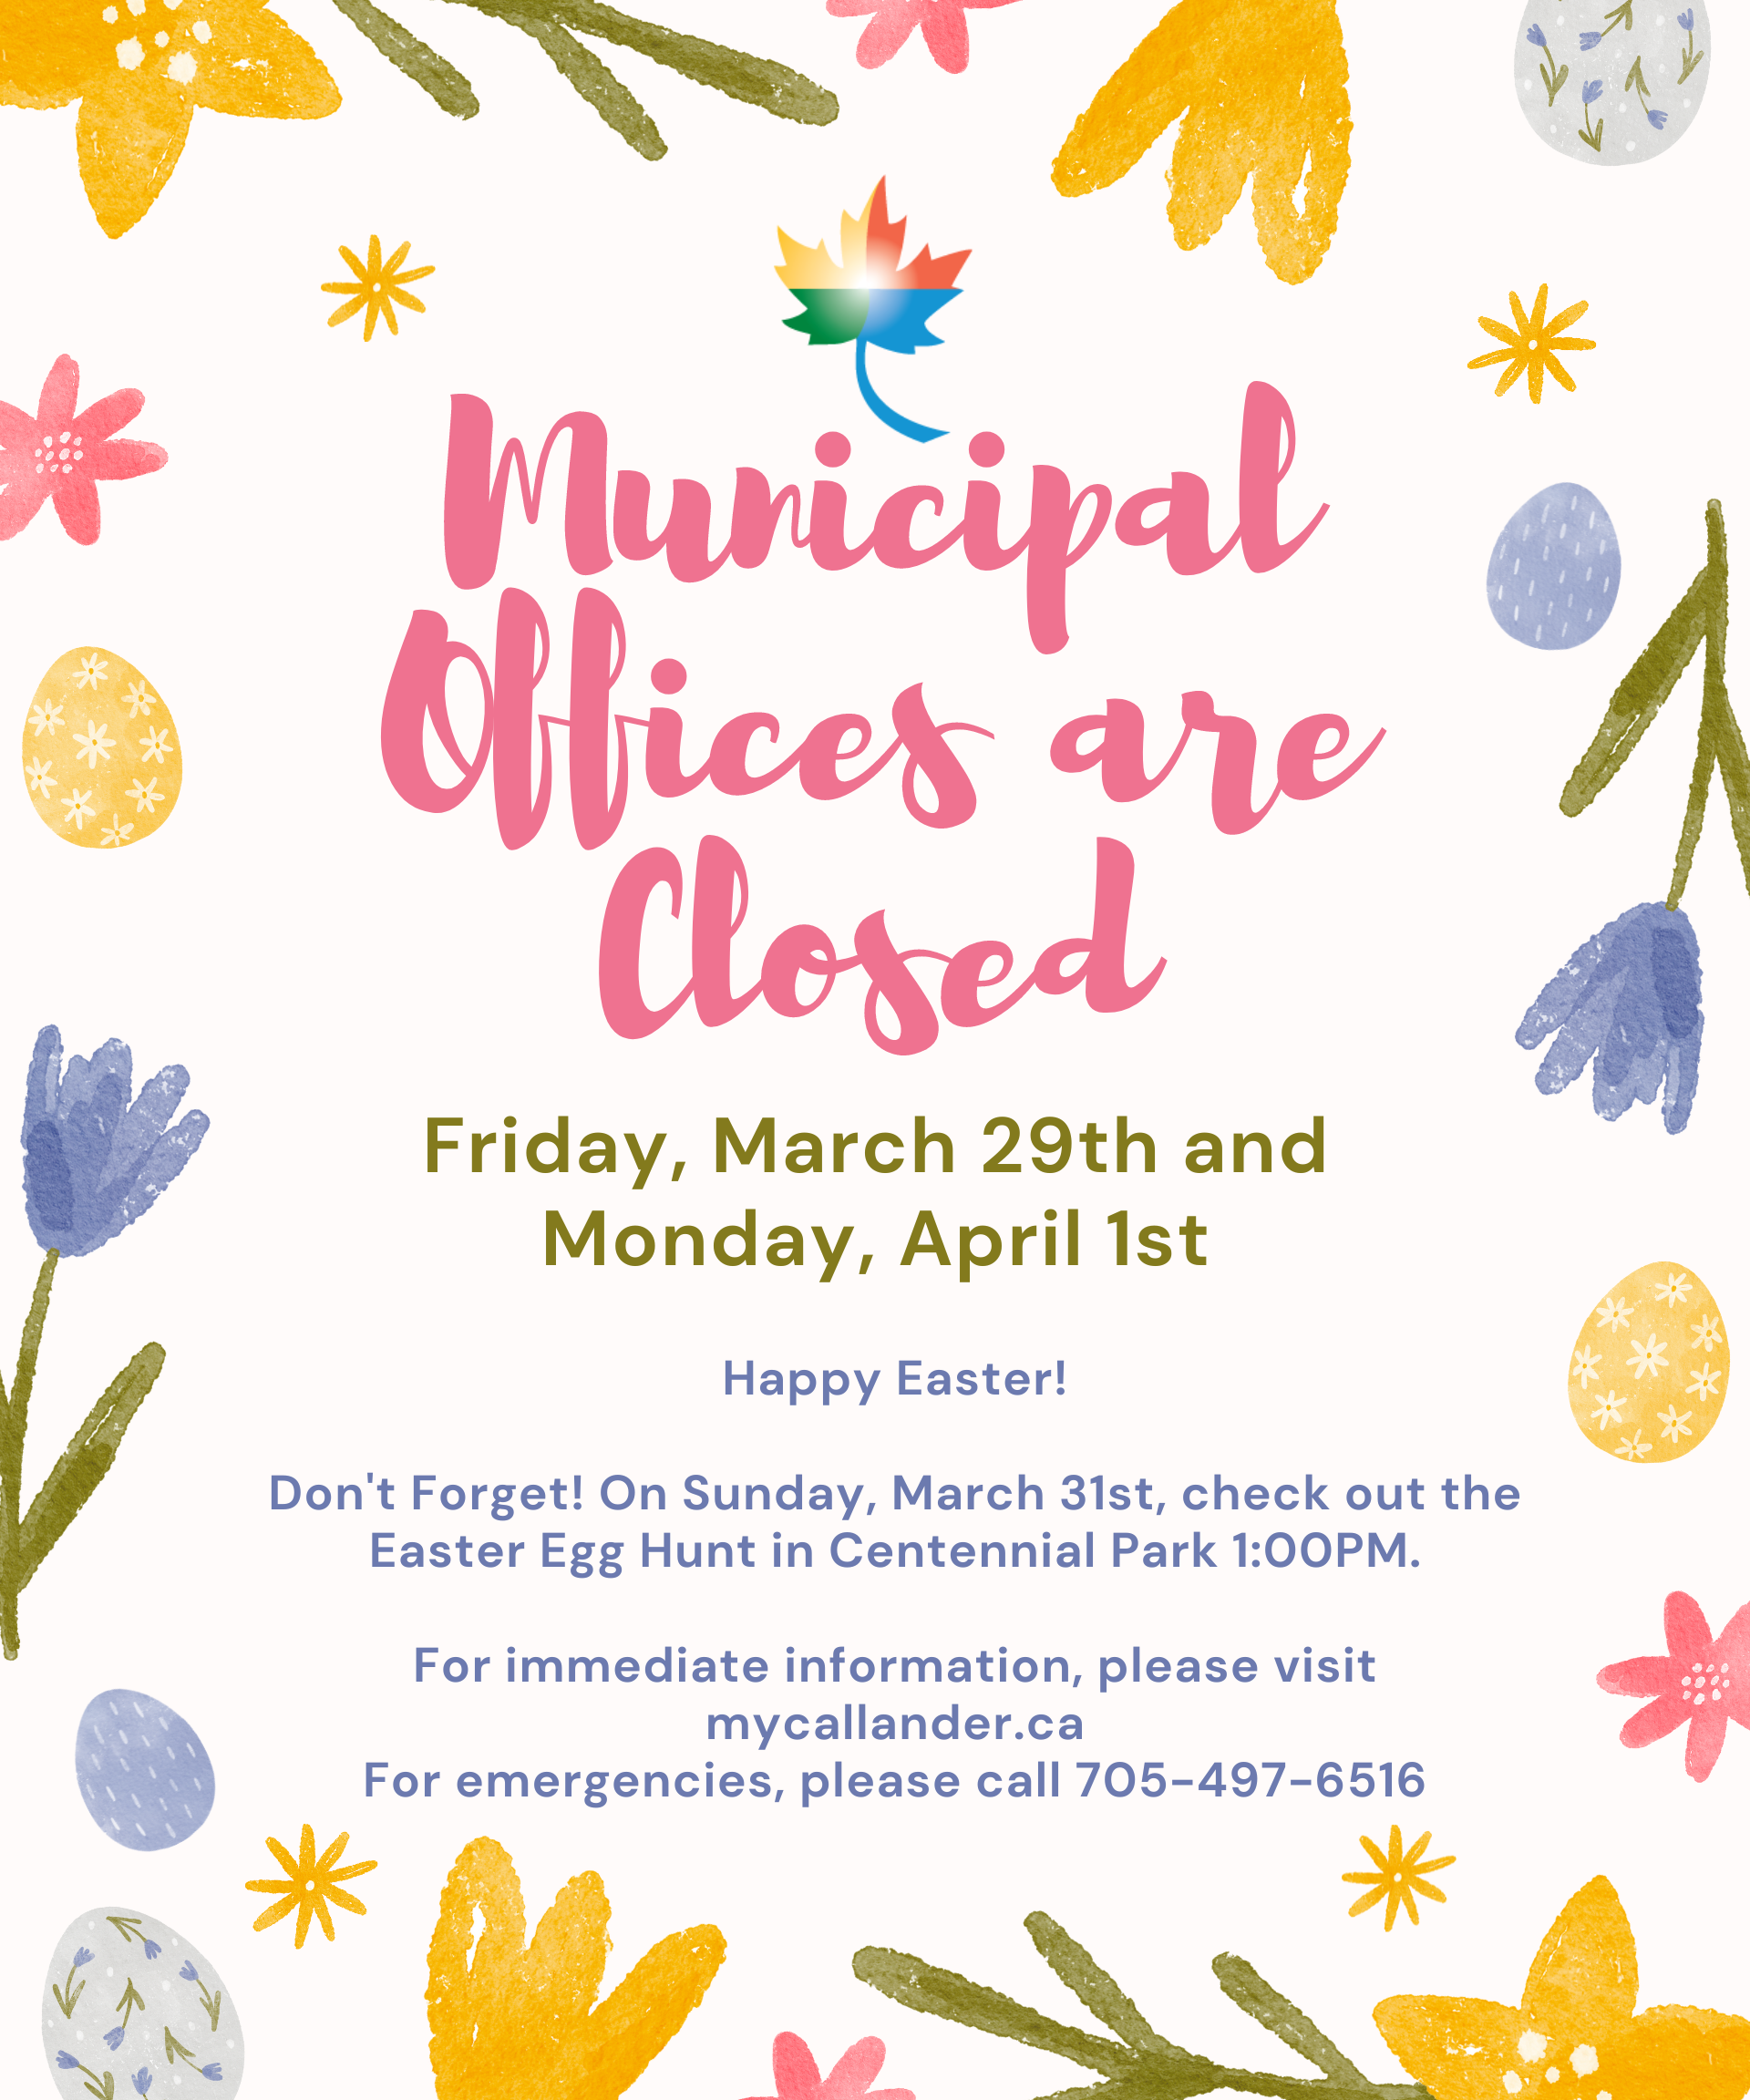 Municipal Offices Closed for Easter